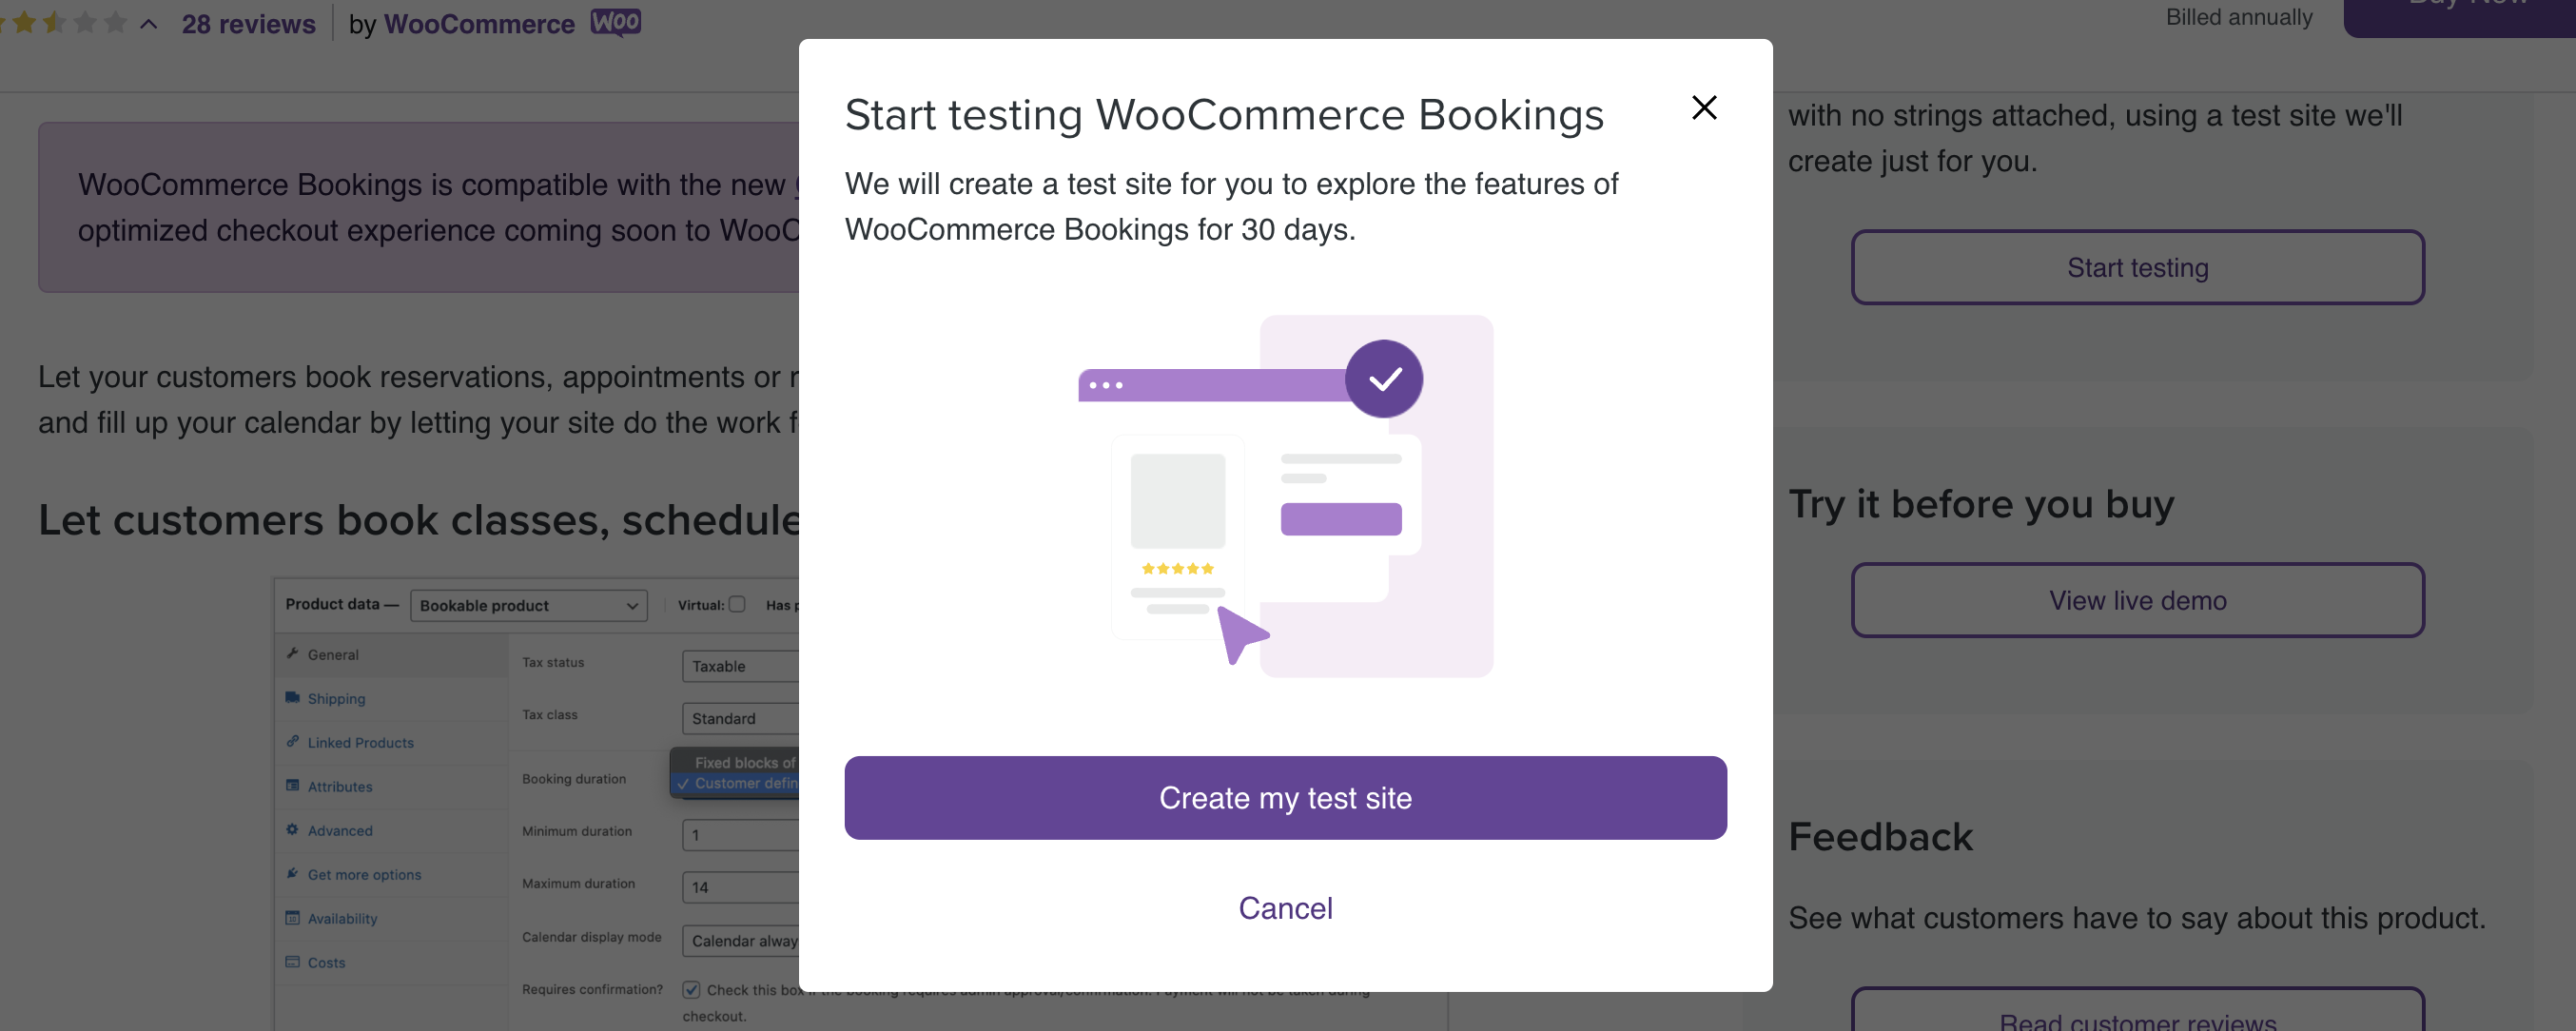 Create WooCommerce test site.png